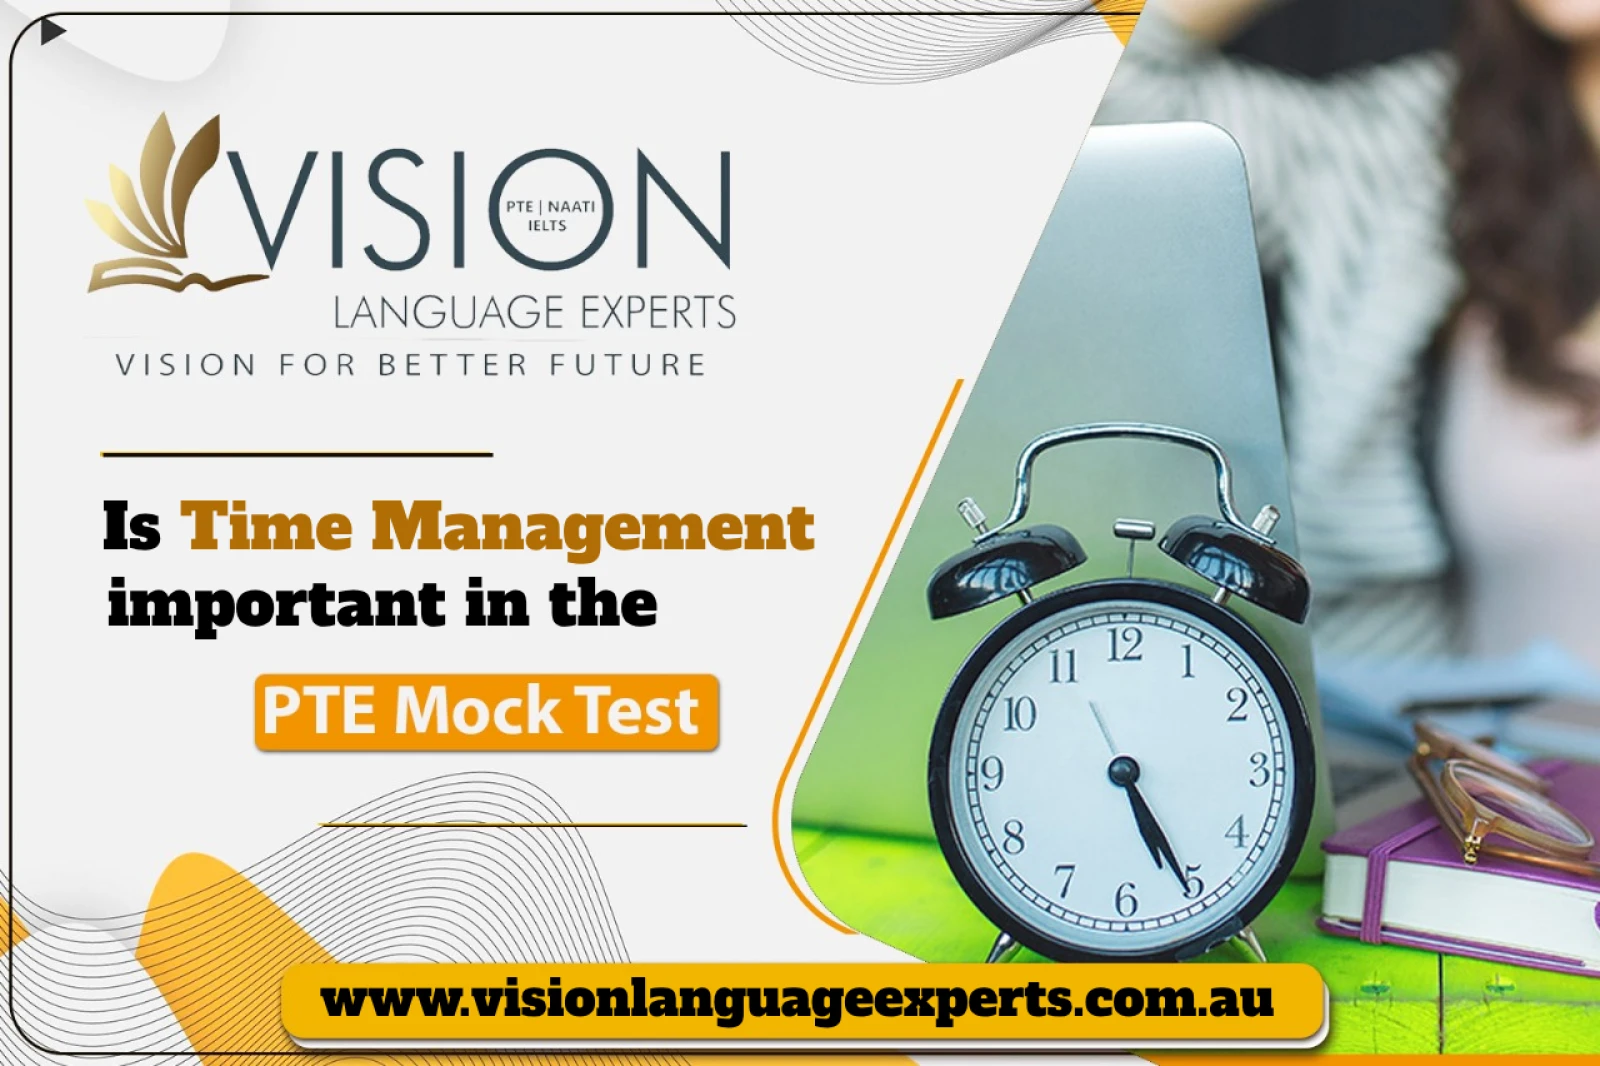 Is time management important in the PTE Mock Test?